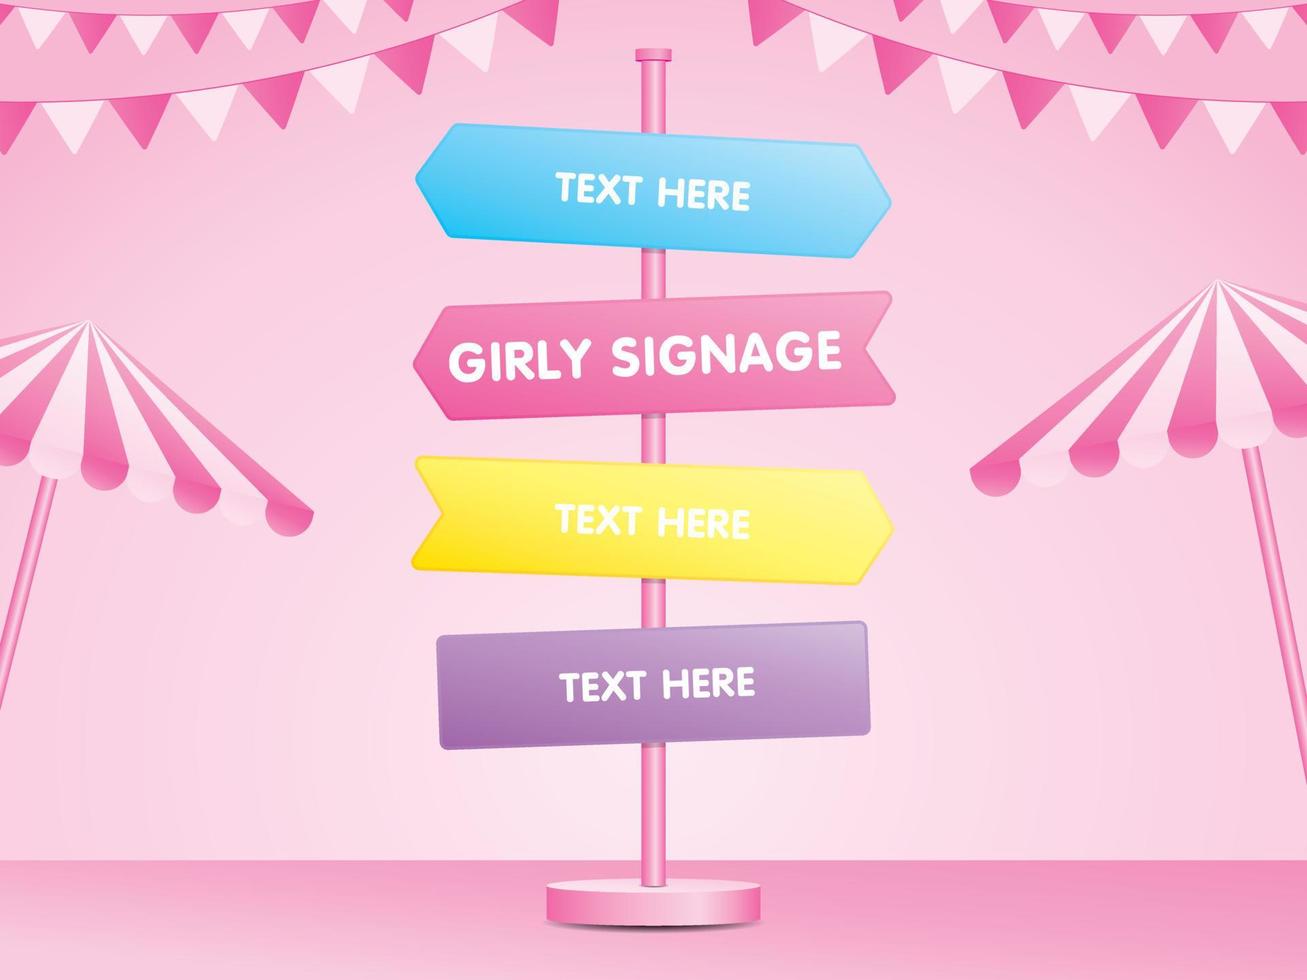 Cute girly colorful signpost with striped parasol and rail flag on pink pastel color background illustration vector